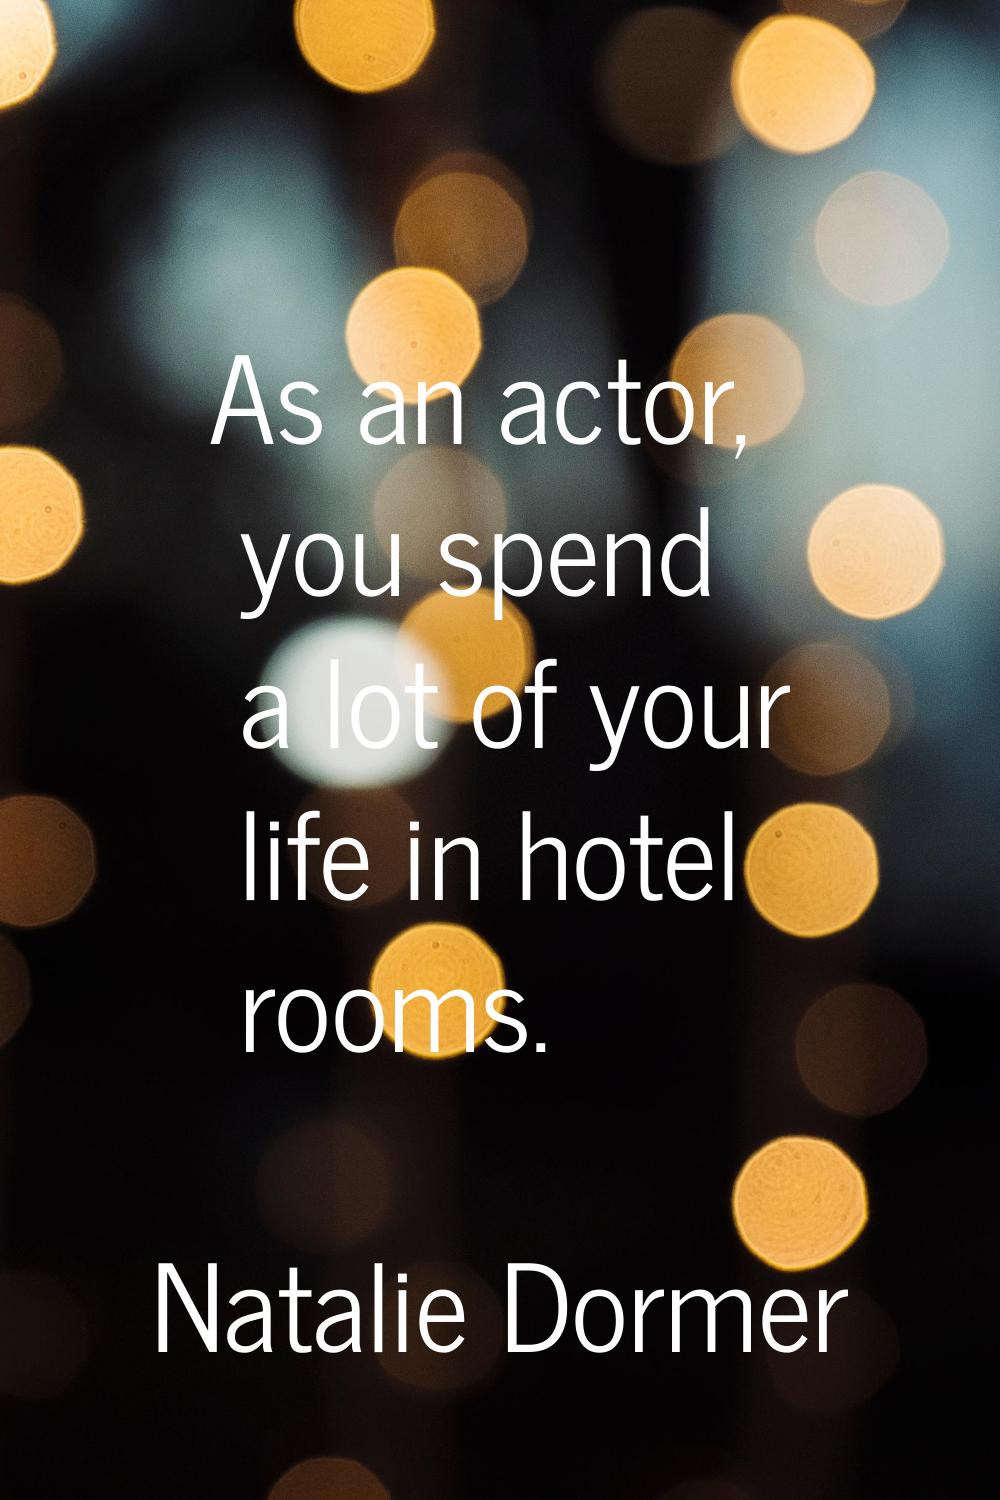 As an actor, you spend a lot of your life in hotel rooms.